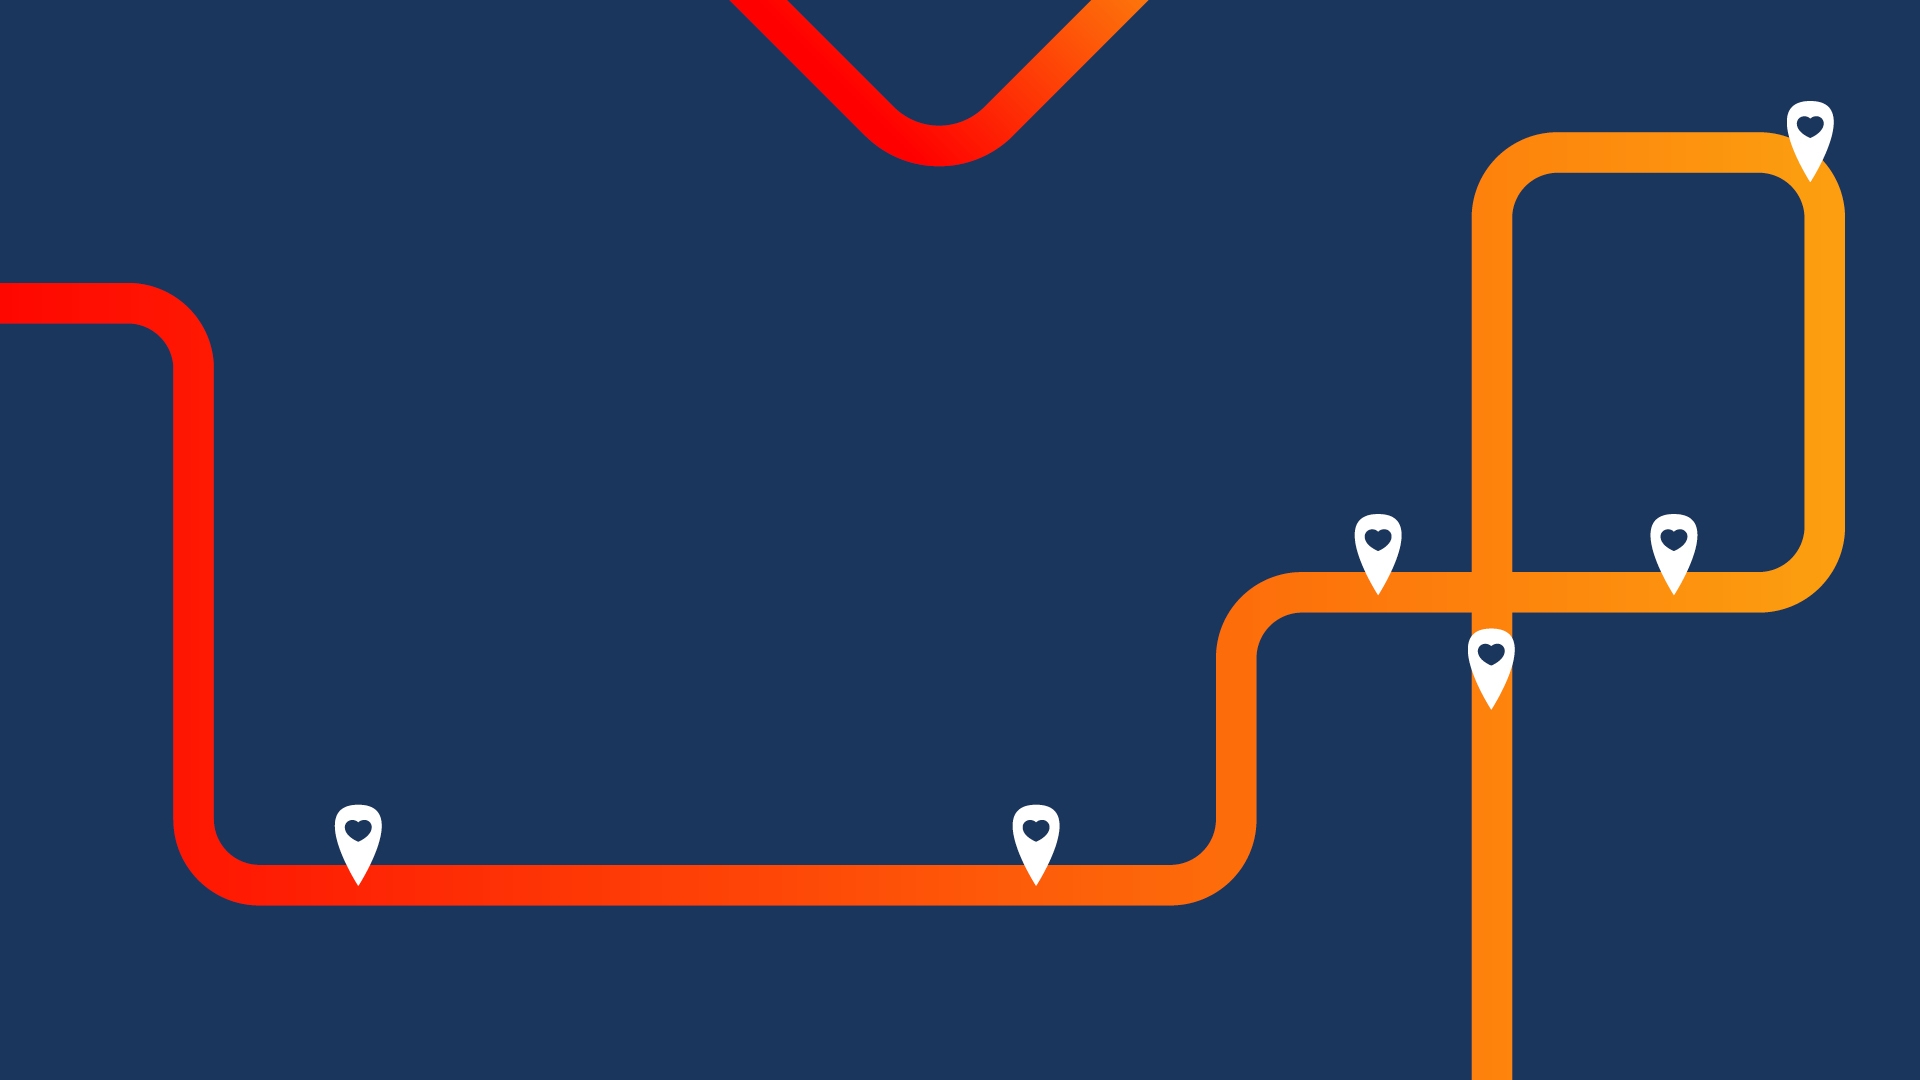 Red, orange lines indicating roadmap, with heart symbols throughout